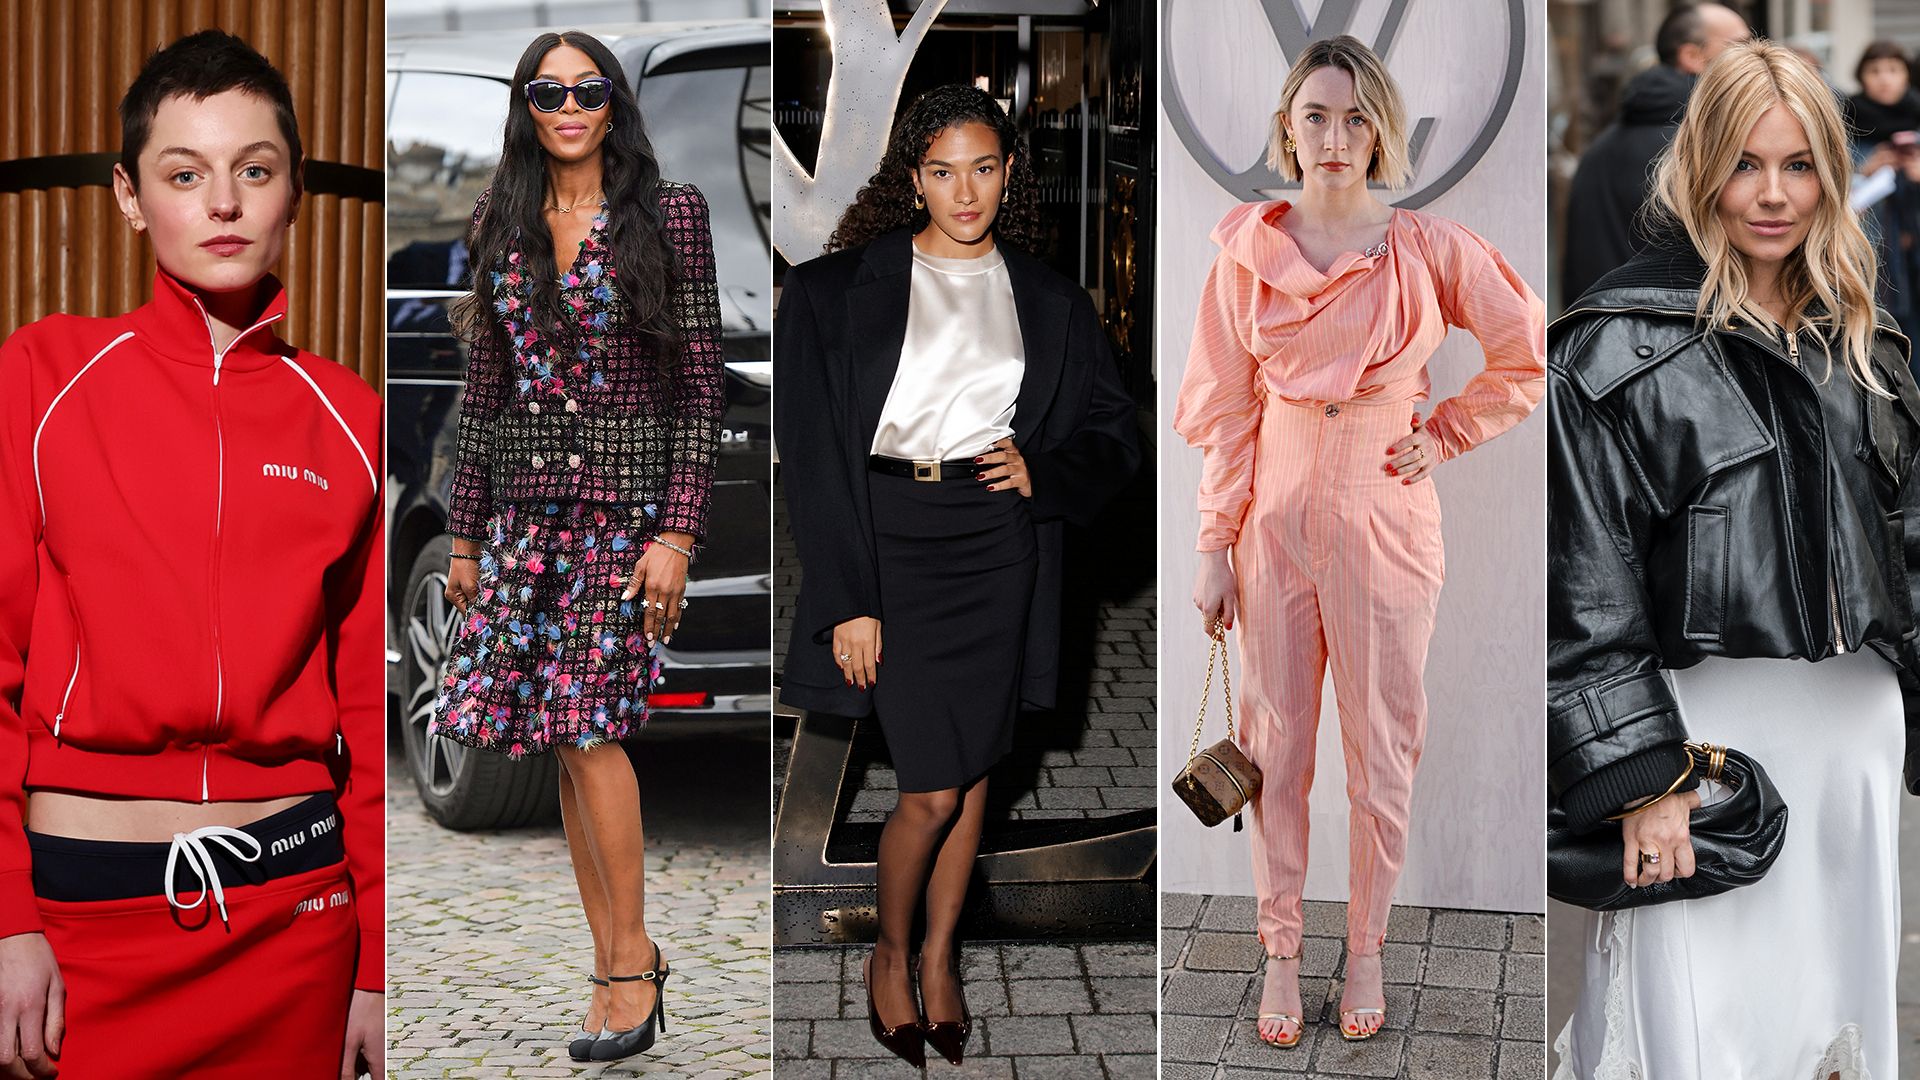 Pantyhose coming back in style? Ariana Grande, Duchess Kate wear the trend